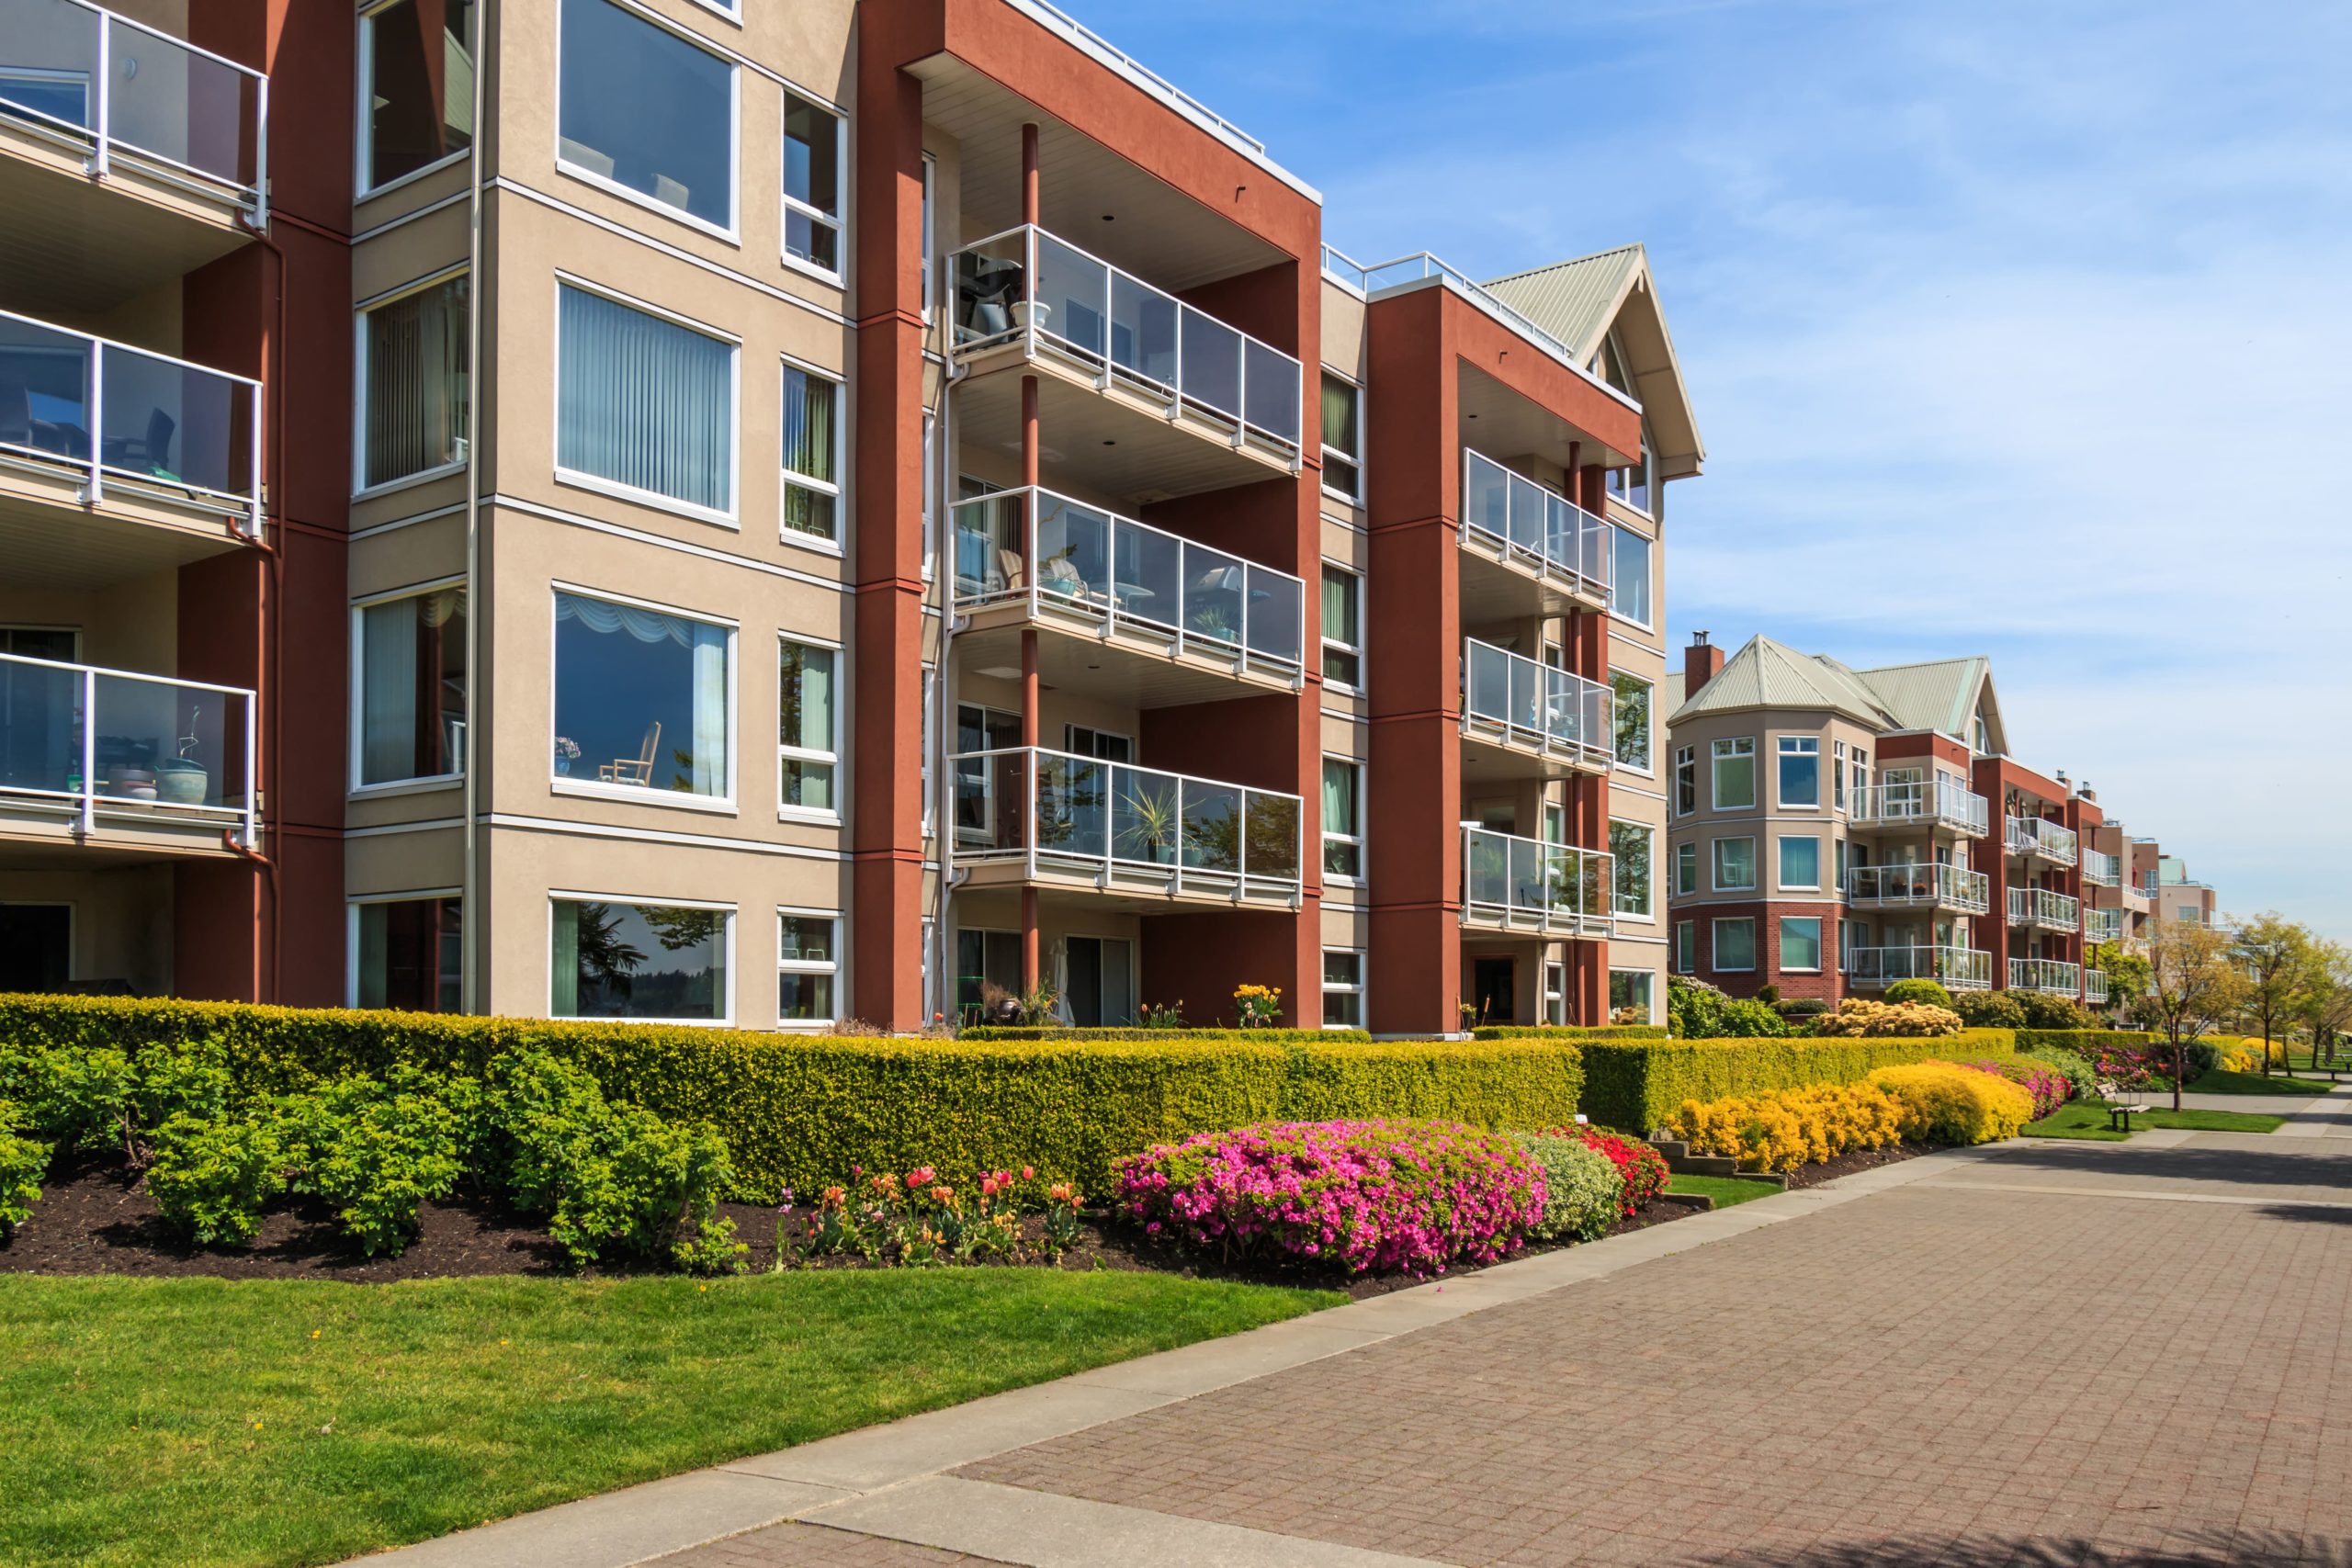 How to Keep Your Condo Property Looking Great & Accessible Every Year